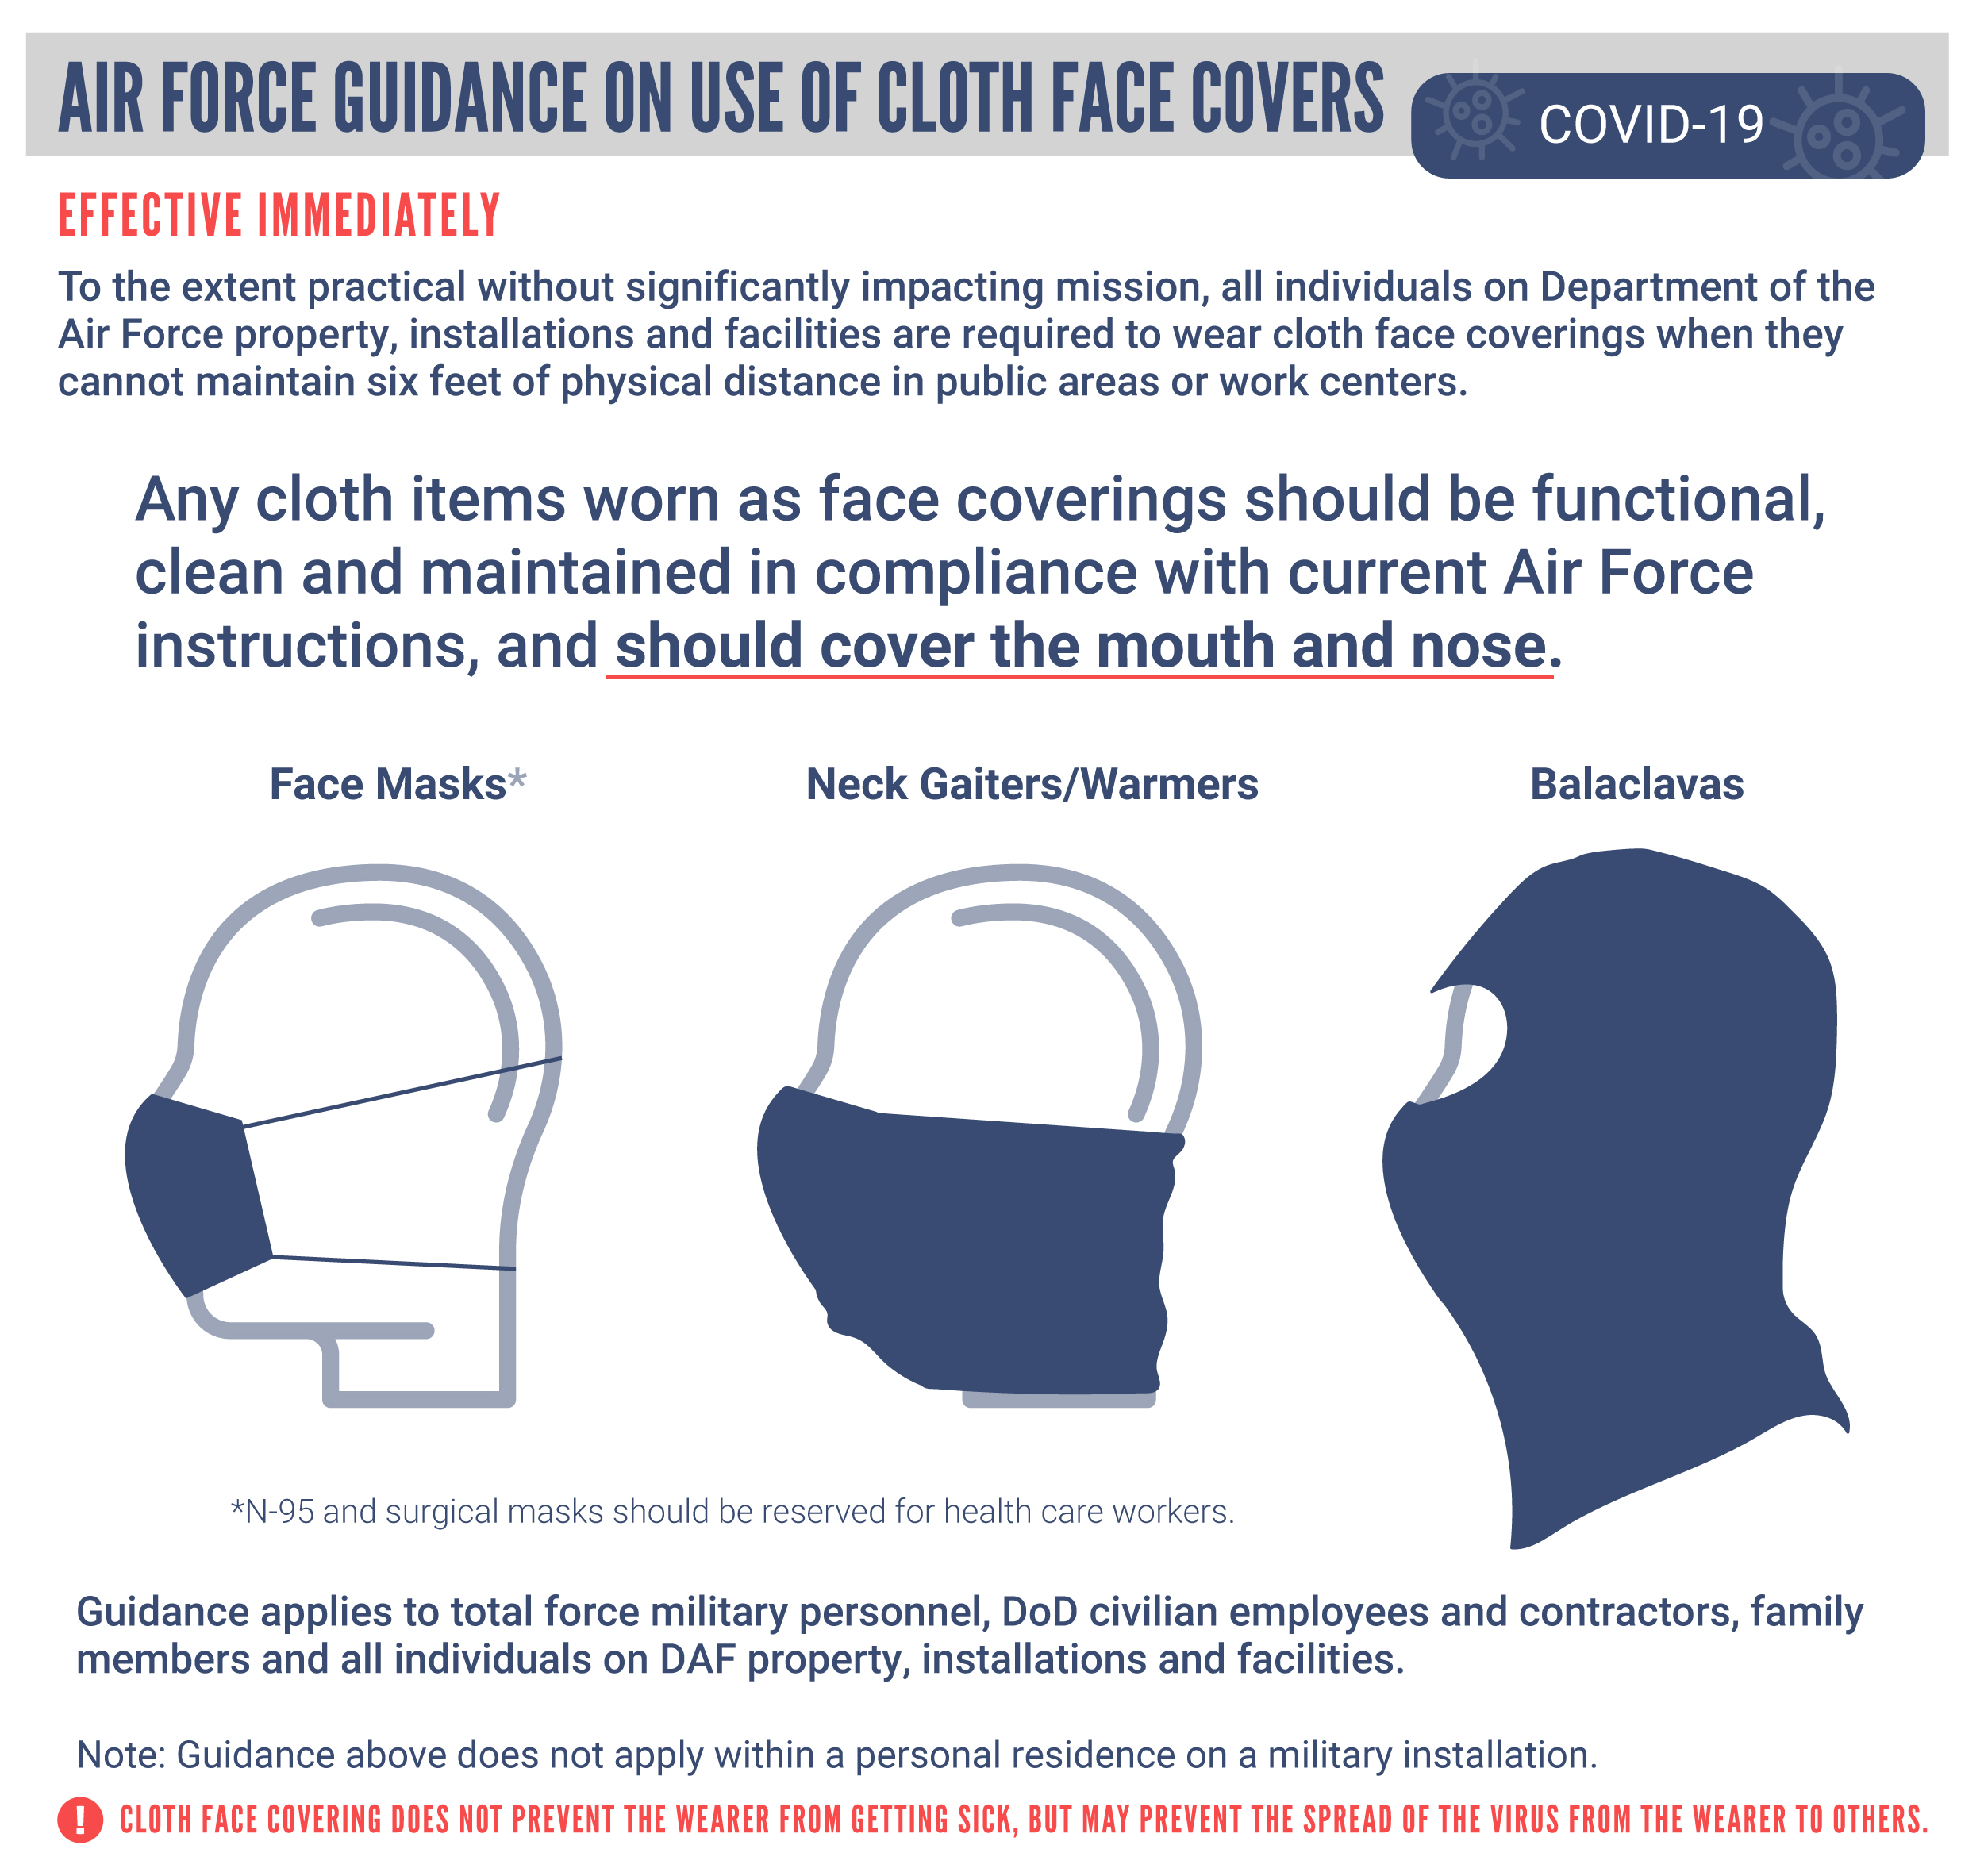 NETEC Resources for Wearing Masks